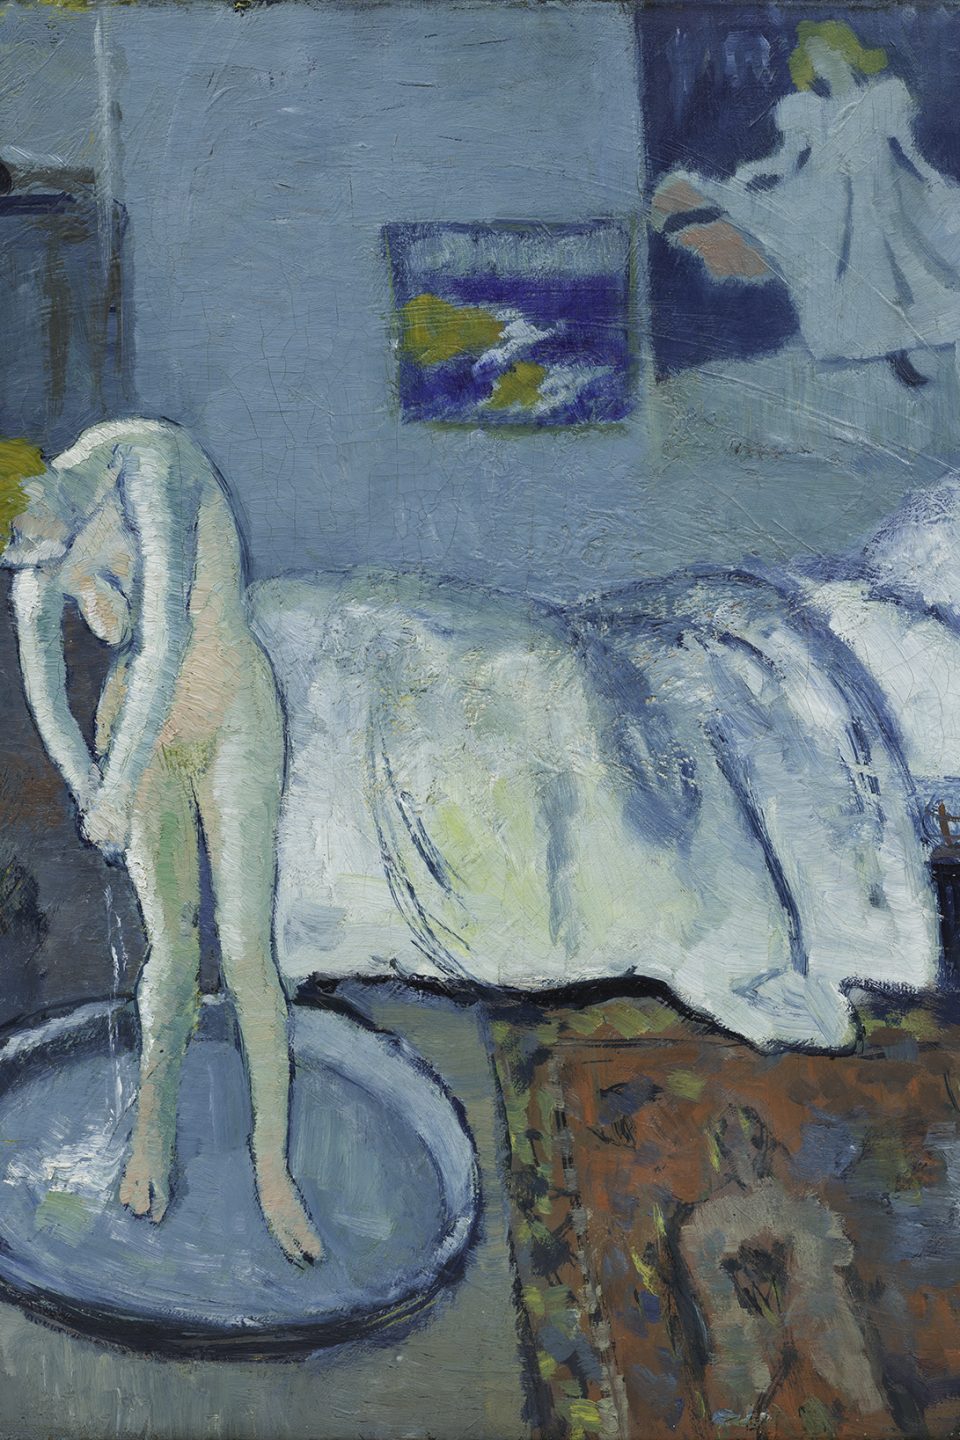 Science Uncovers Hidden Truths behind Young Pablo Picasso’s Blue Period